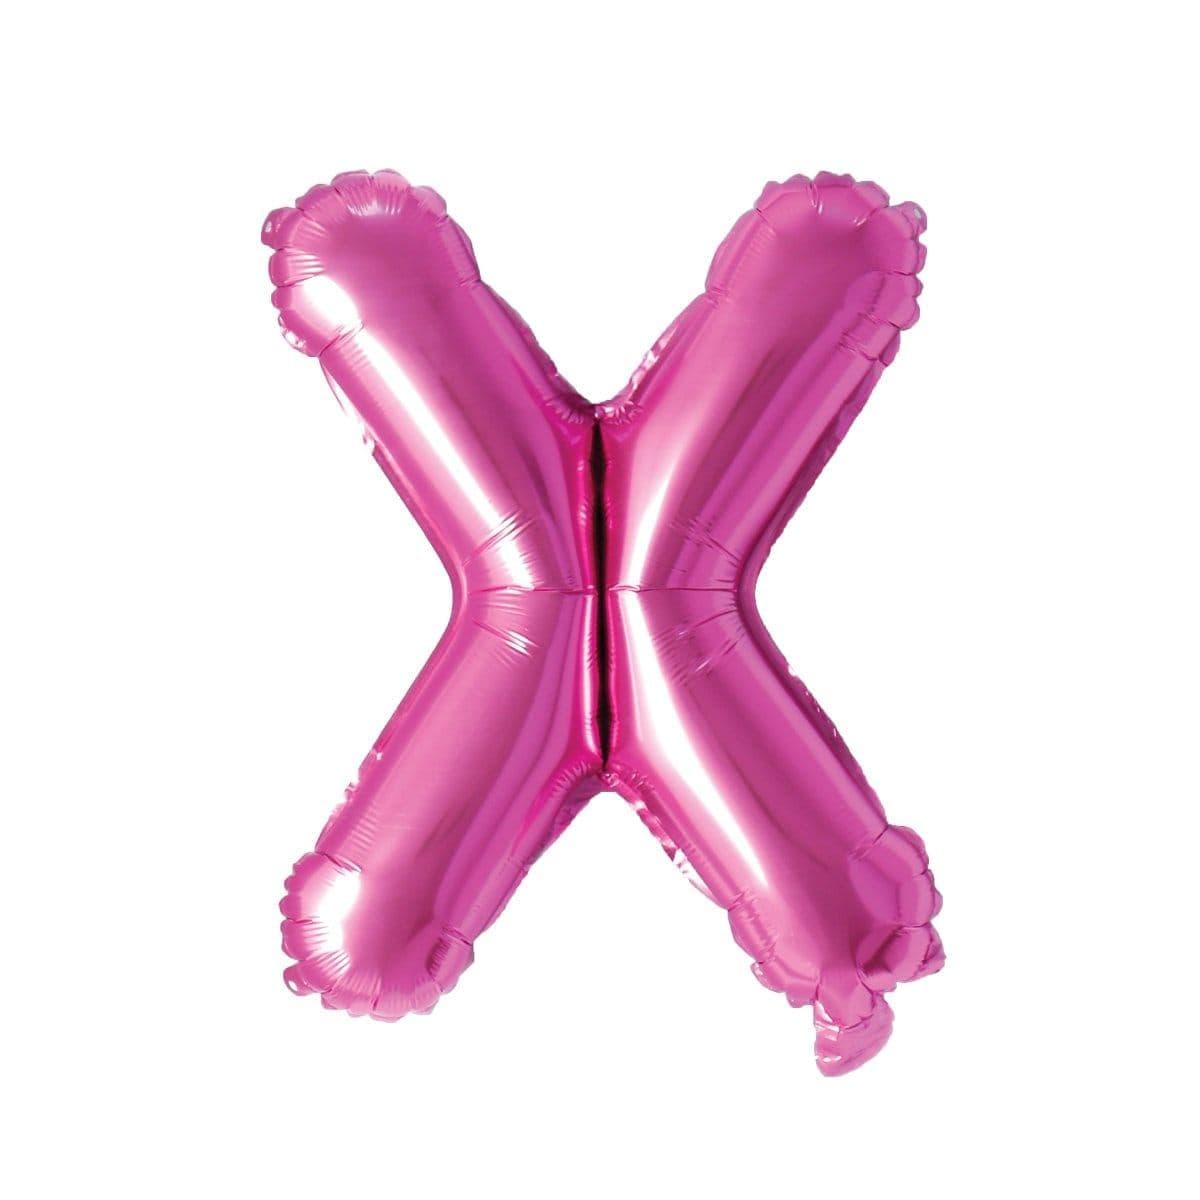 Buy Balloons Pink Letter X Foil Balloon, 16 Inches sold at Party Expert